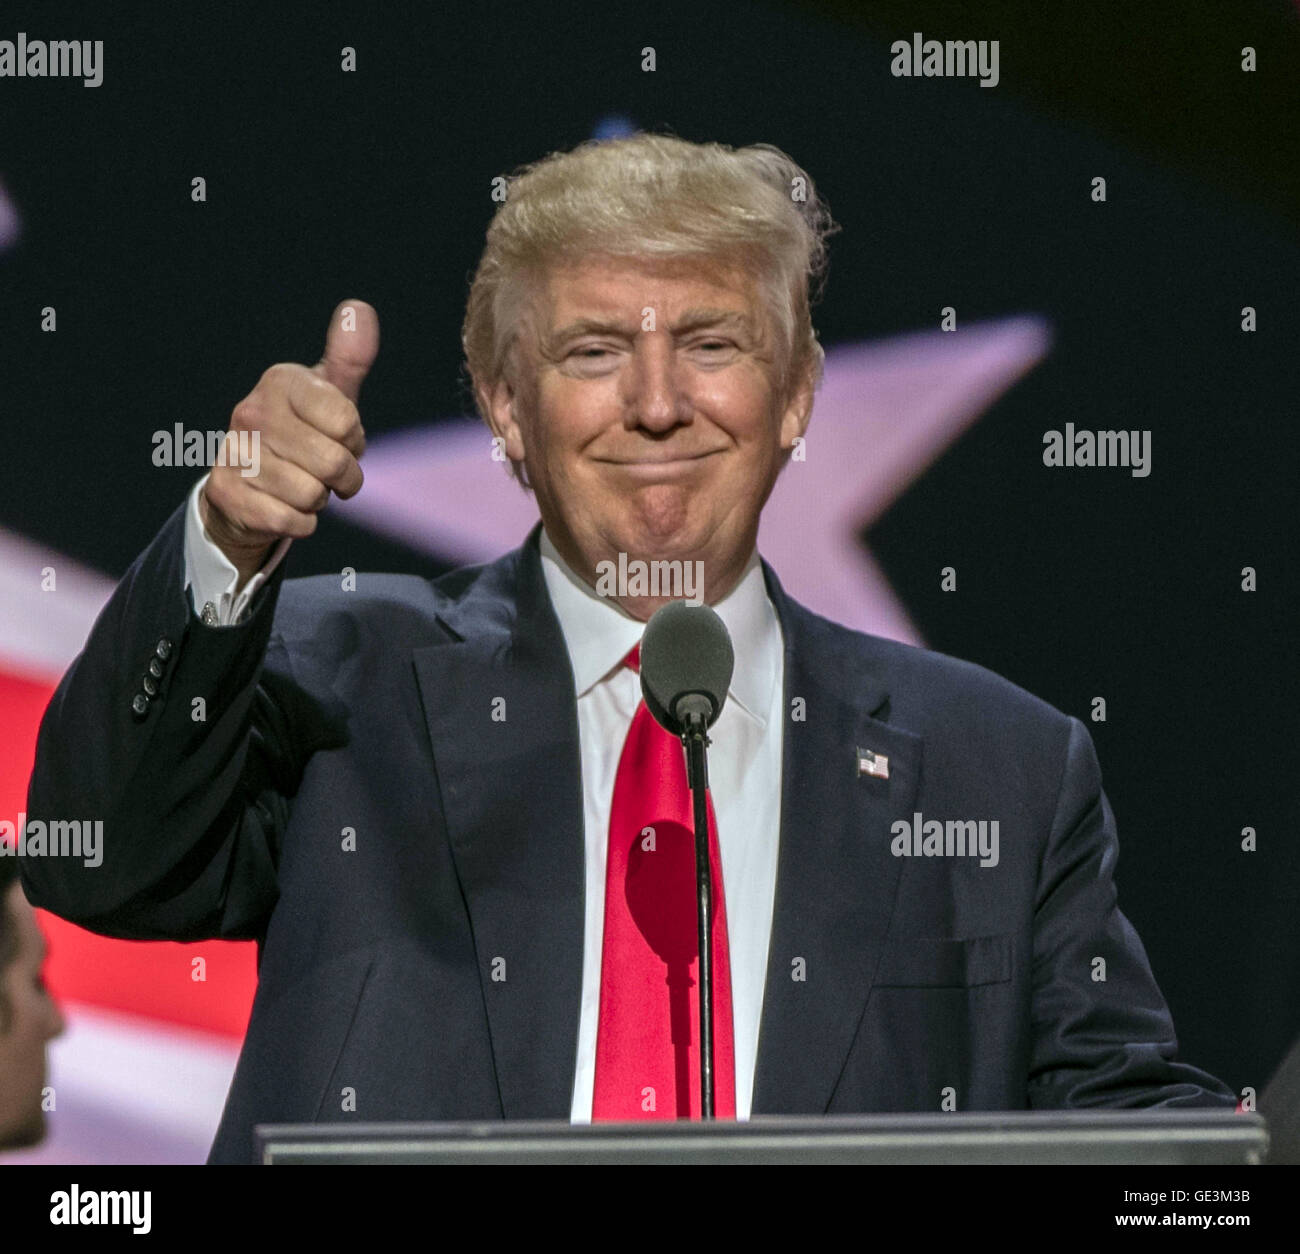 Cleveland, Ohio, USA. 21st July, 2016. DONALD TRUMP gives a thumbs up during the sound checks this morning at the Quicken Arena. Trump will give the keynote speech at the Republican National Convention. © Mark Reinstein/zReportage.com/ZUMA Wire/Alamy Live News Stock Photo